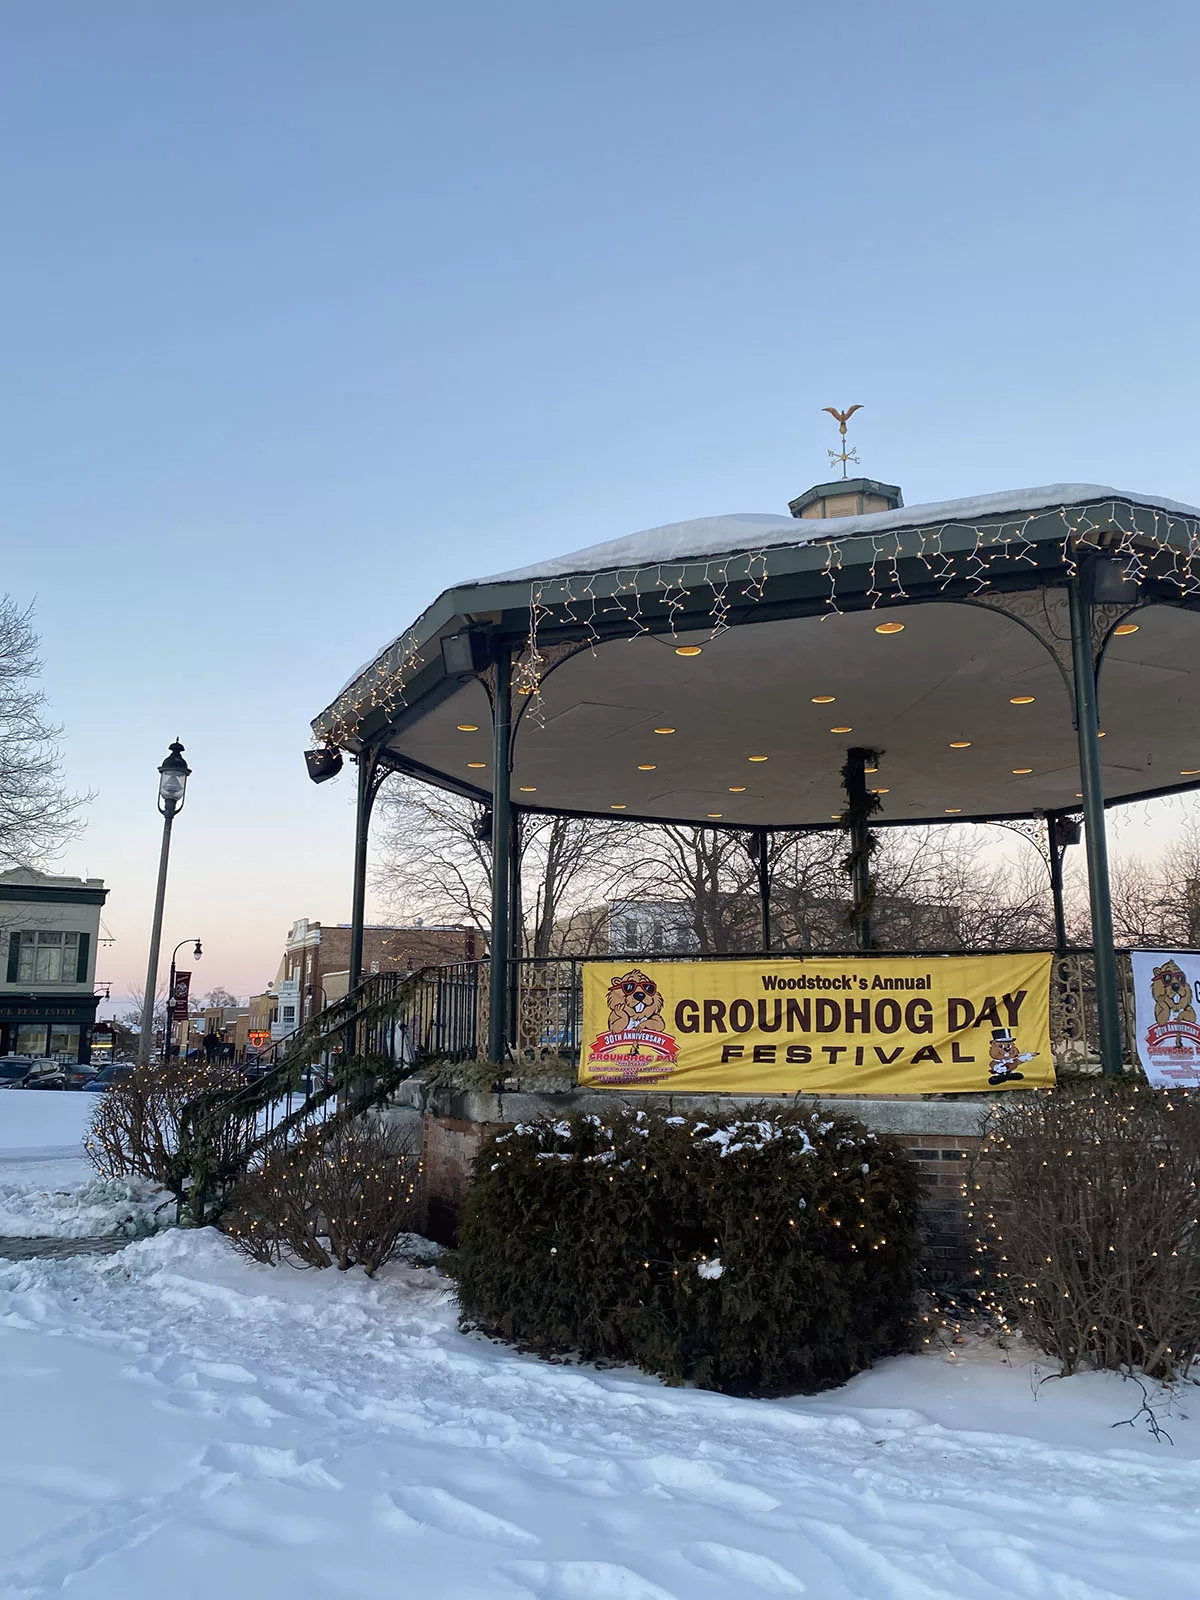 Gazebo on the historic town square in Woodstock, Illinois